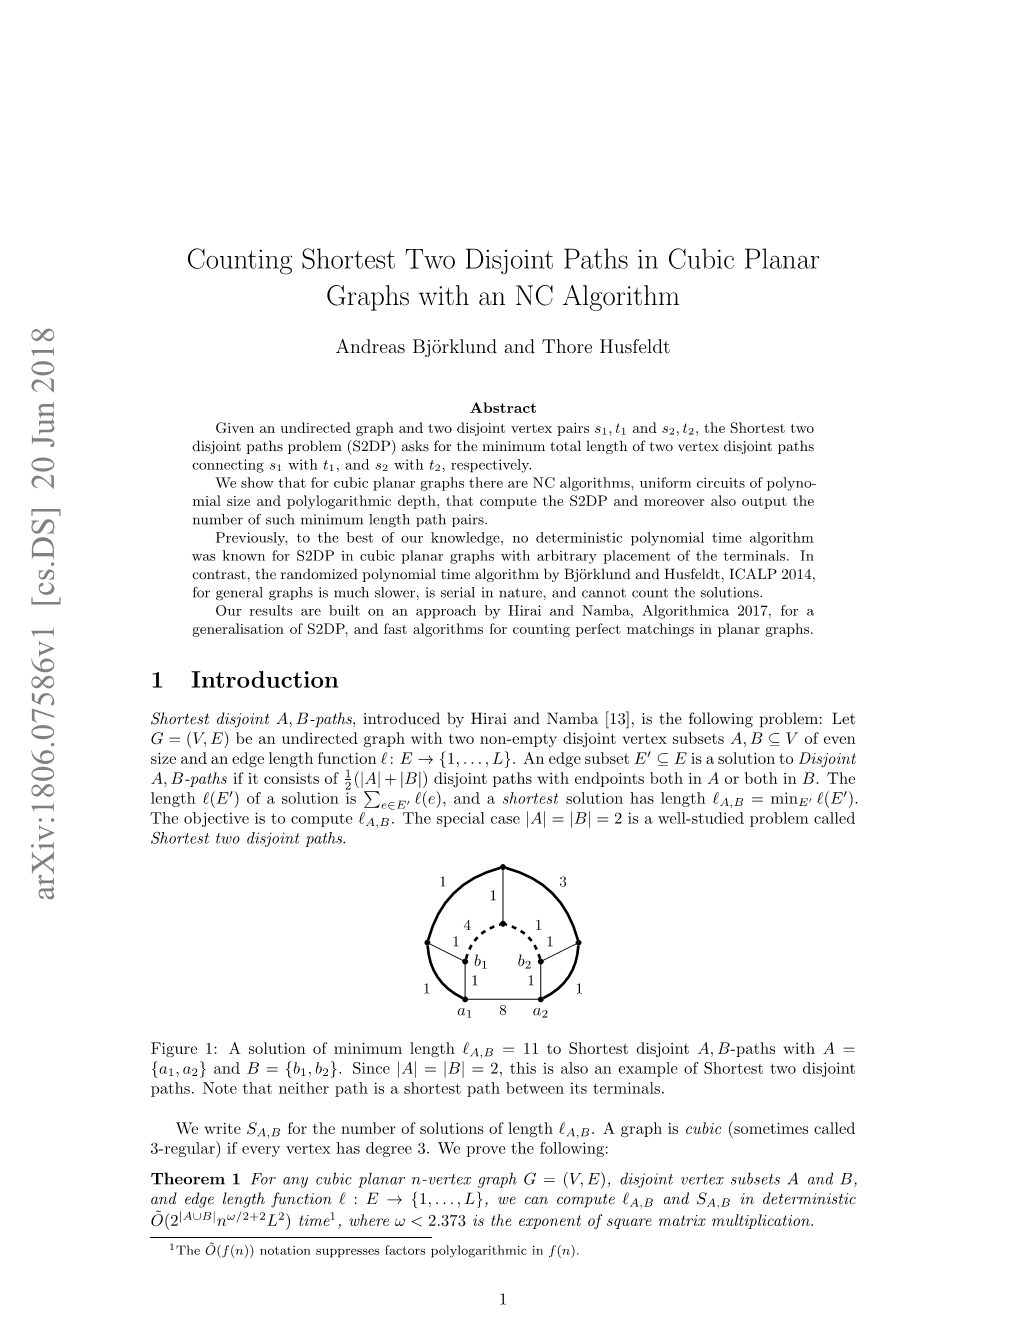 Counting Shortest Two Disjoint Paths in Cubic Planar Graphs With